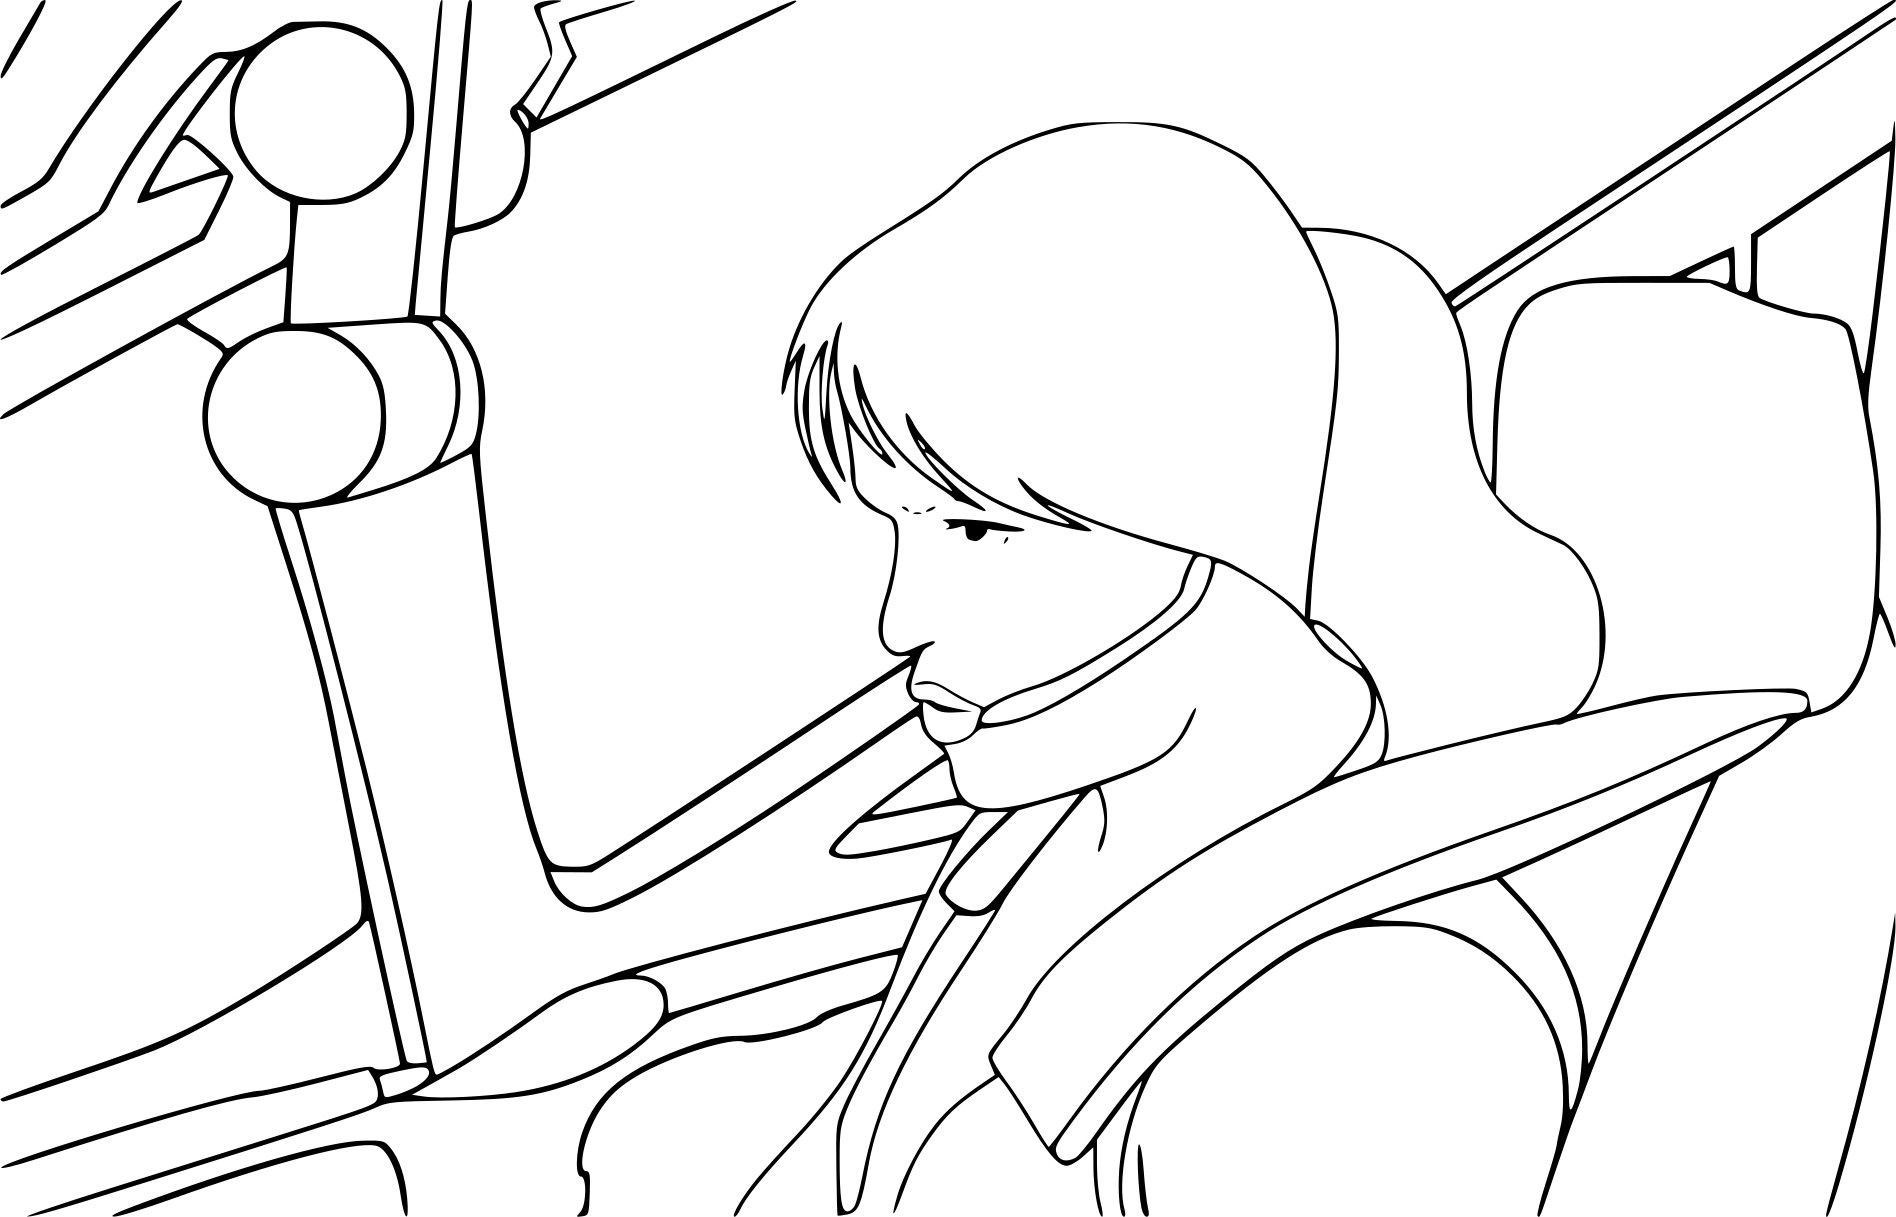 Airplane Pilot coloring page